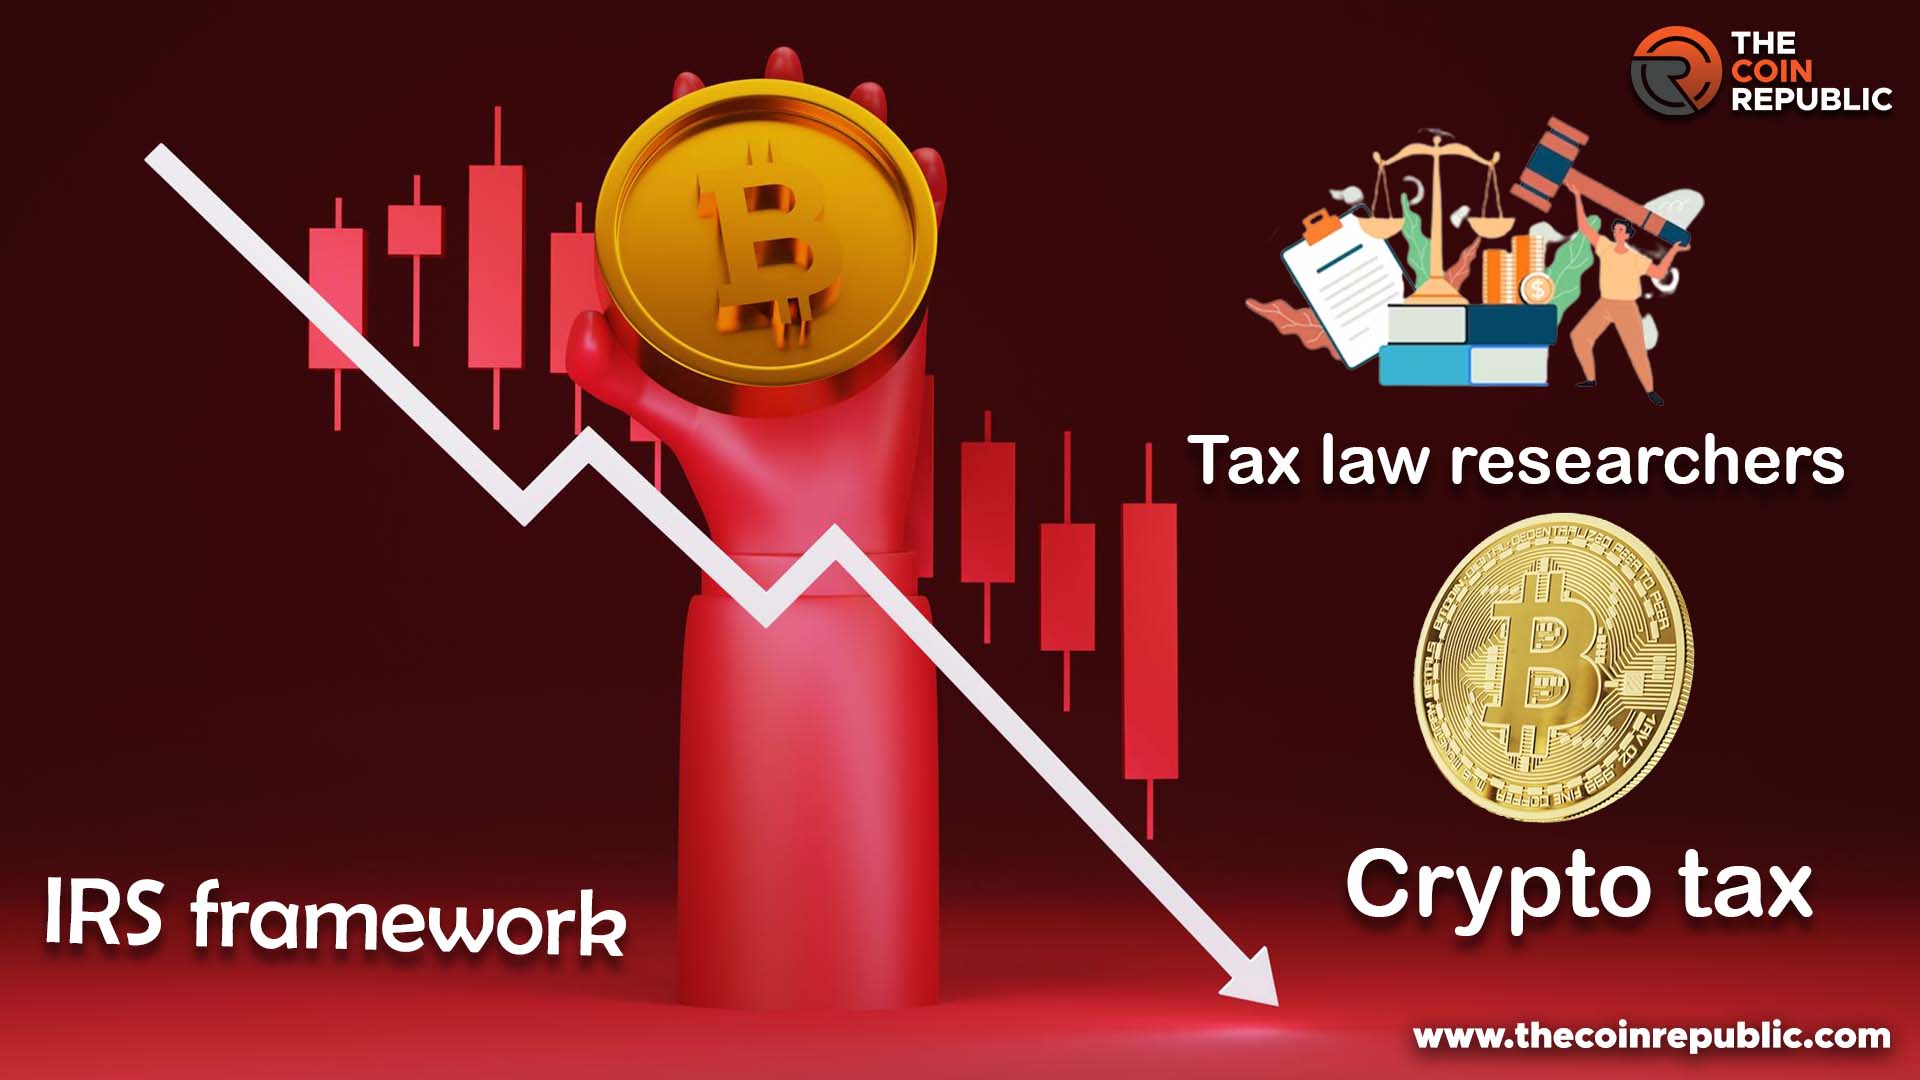 New Crypto Taxation Framework Proposed by Tax Law Researchers